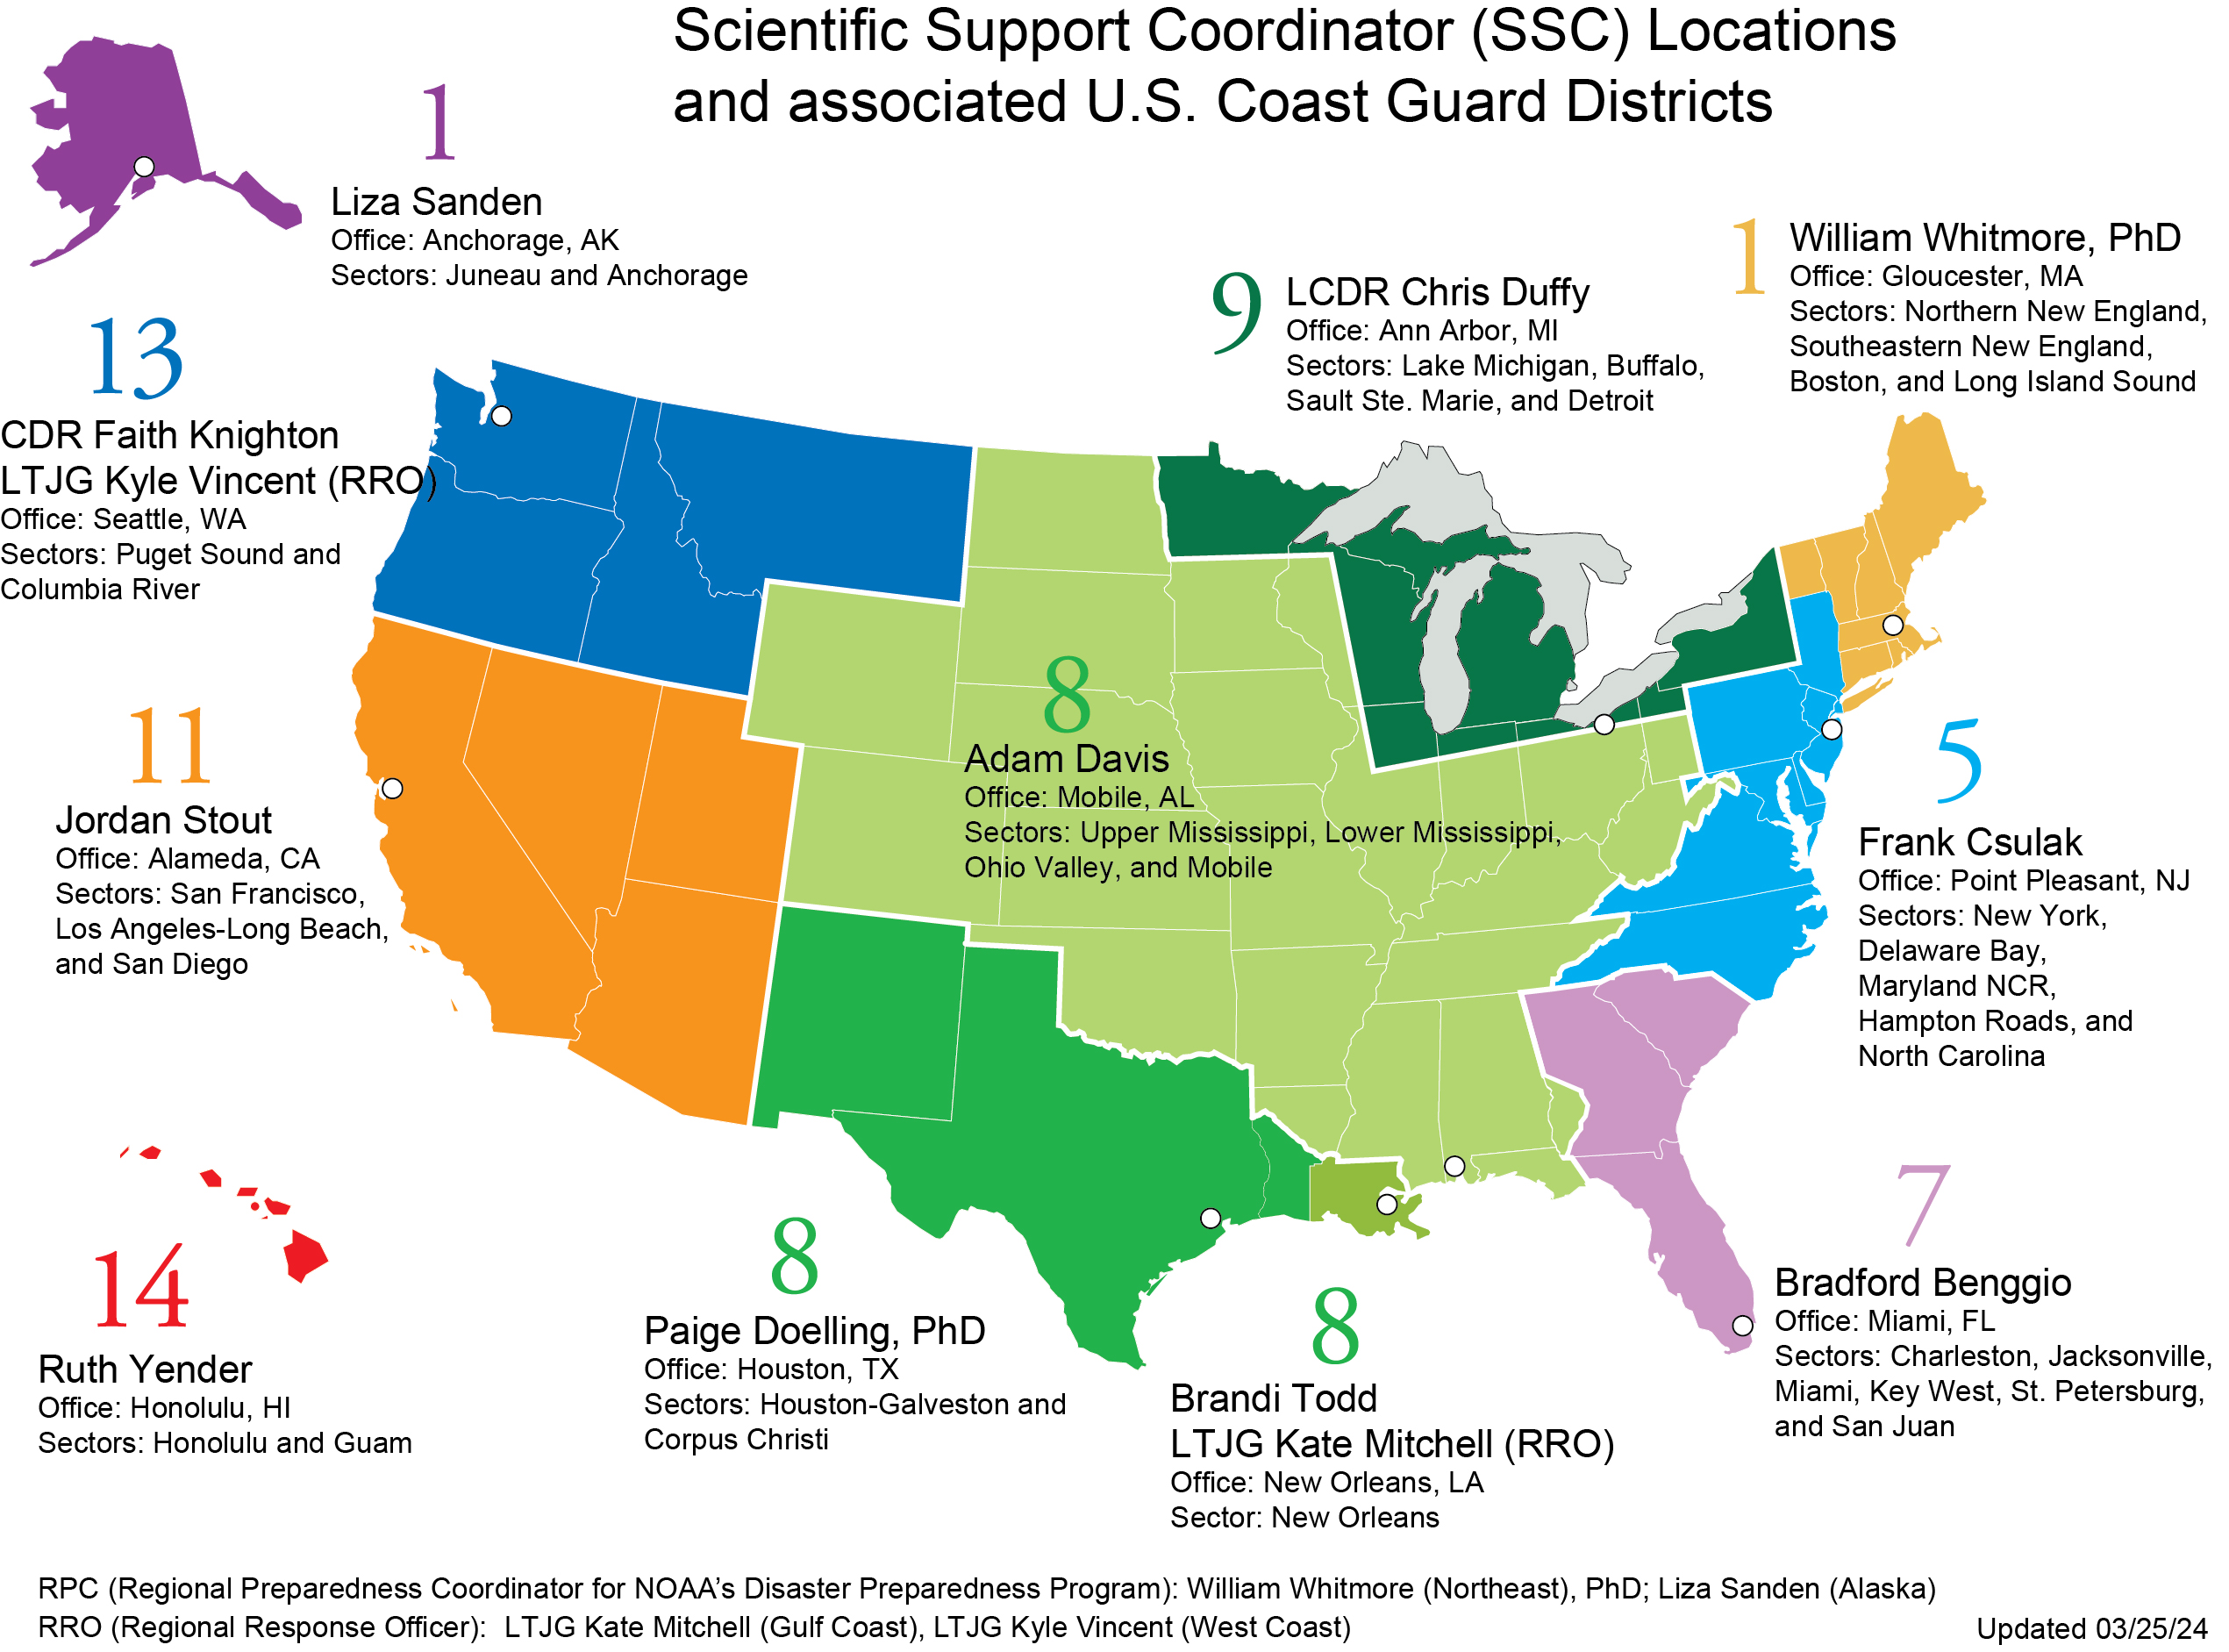 Map of U.S., showing Scientific Support Coordinator (SSC) locations and associated U.S. Coast Guard Districts.